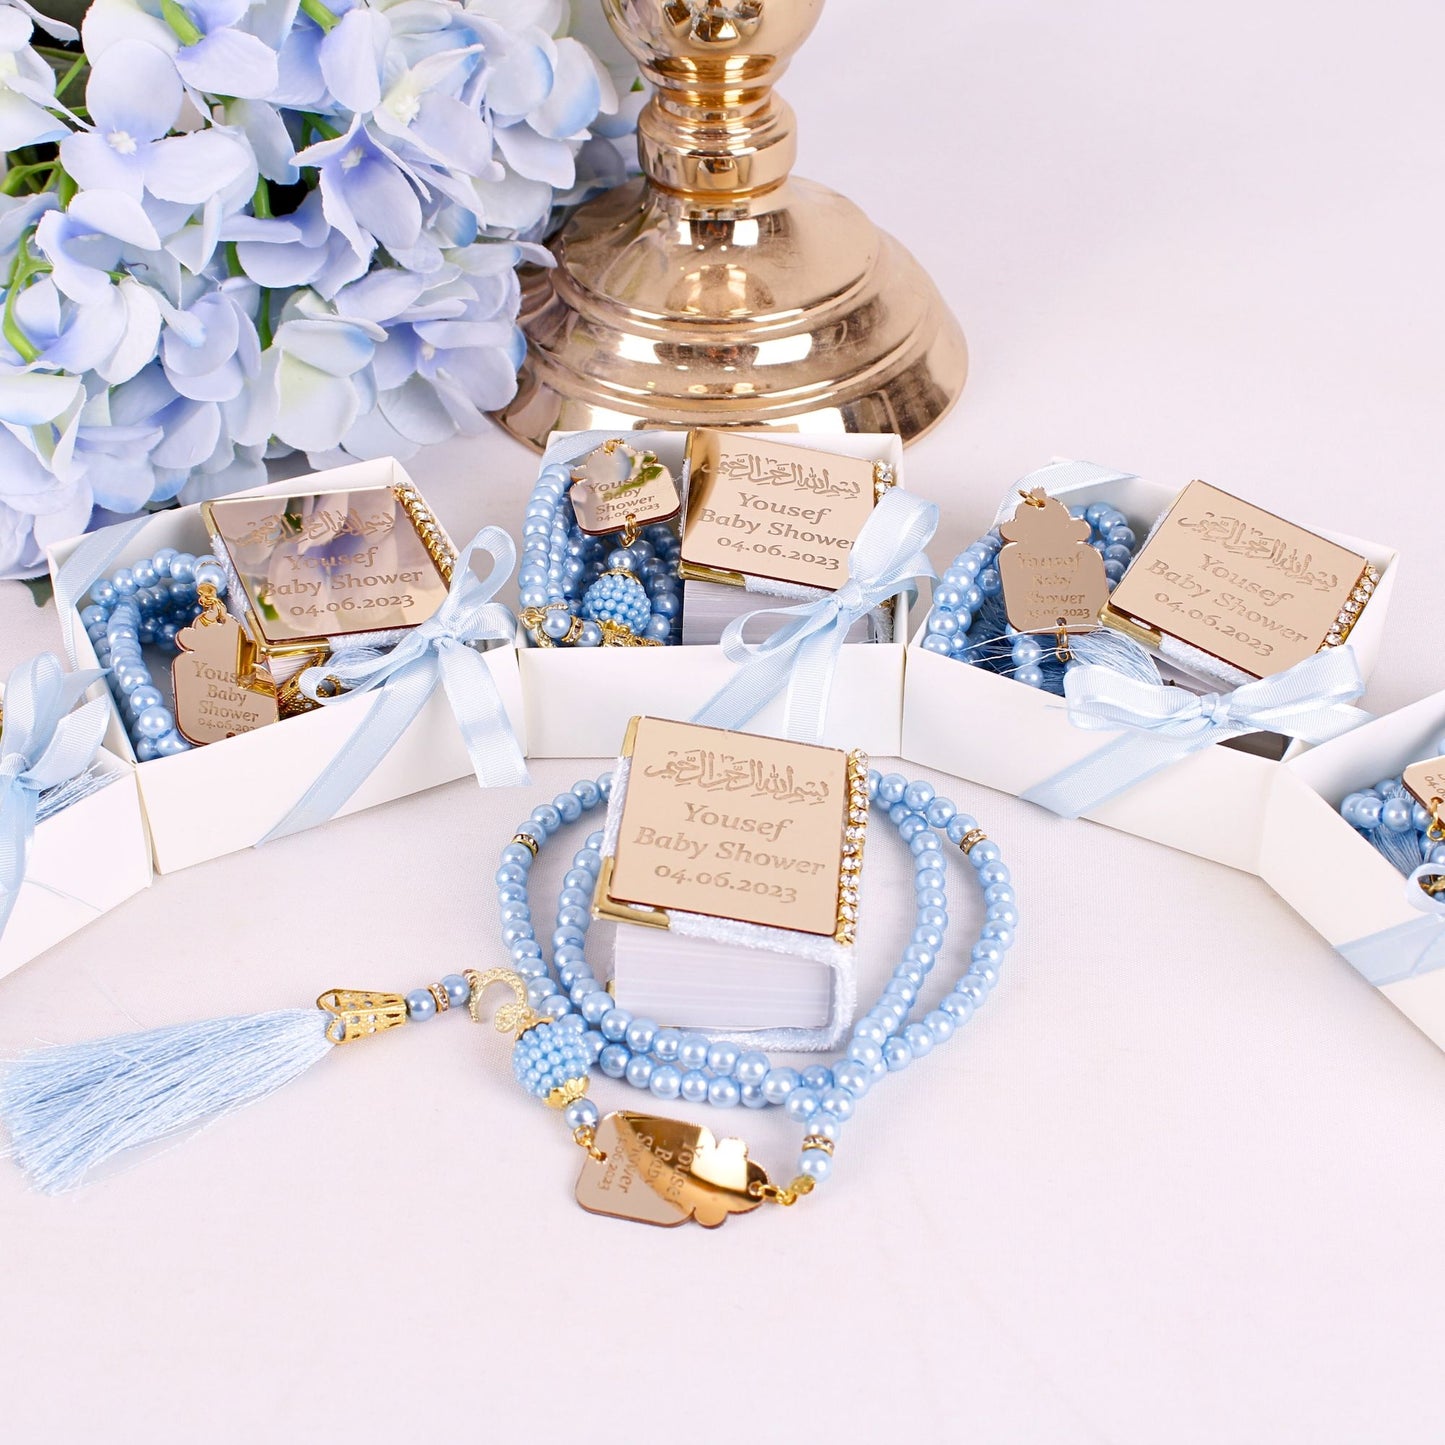 Personalized Mini Quran Pearl Prayer Beads Baby Shower Favor for Boys - Islamic Elite Favors is a handmade gift shop offering a wide variety of unique and personalized gifts for all occasions. Whether you're looking for the perfect Ramadan, Eid, Hajj, wedding gift or something special for a birthday, baby shower or anniversary, we have something for everyone. High quality, made with love.